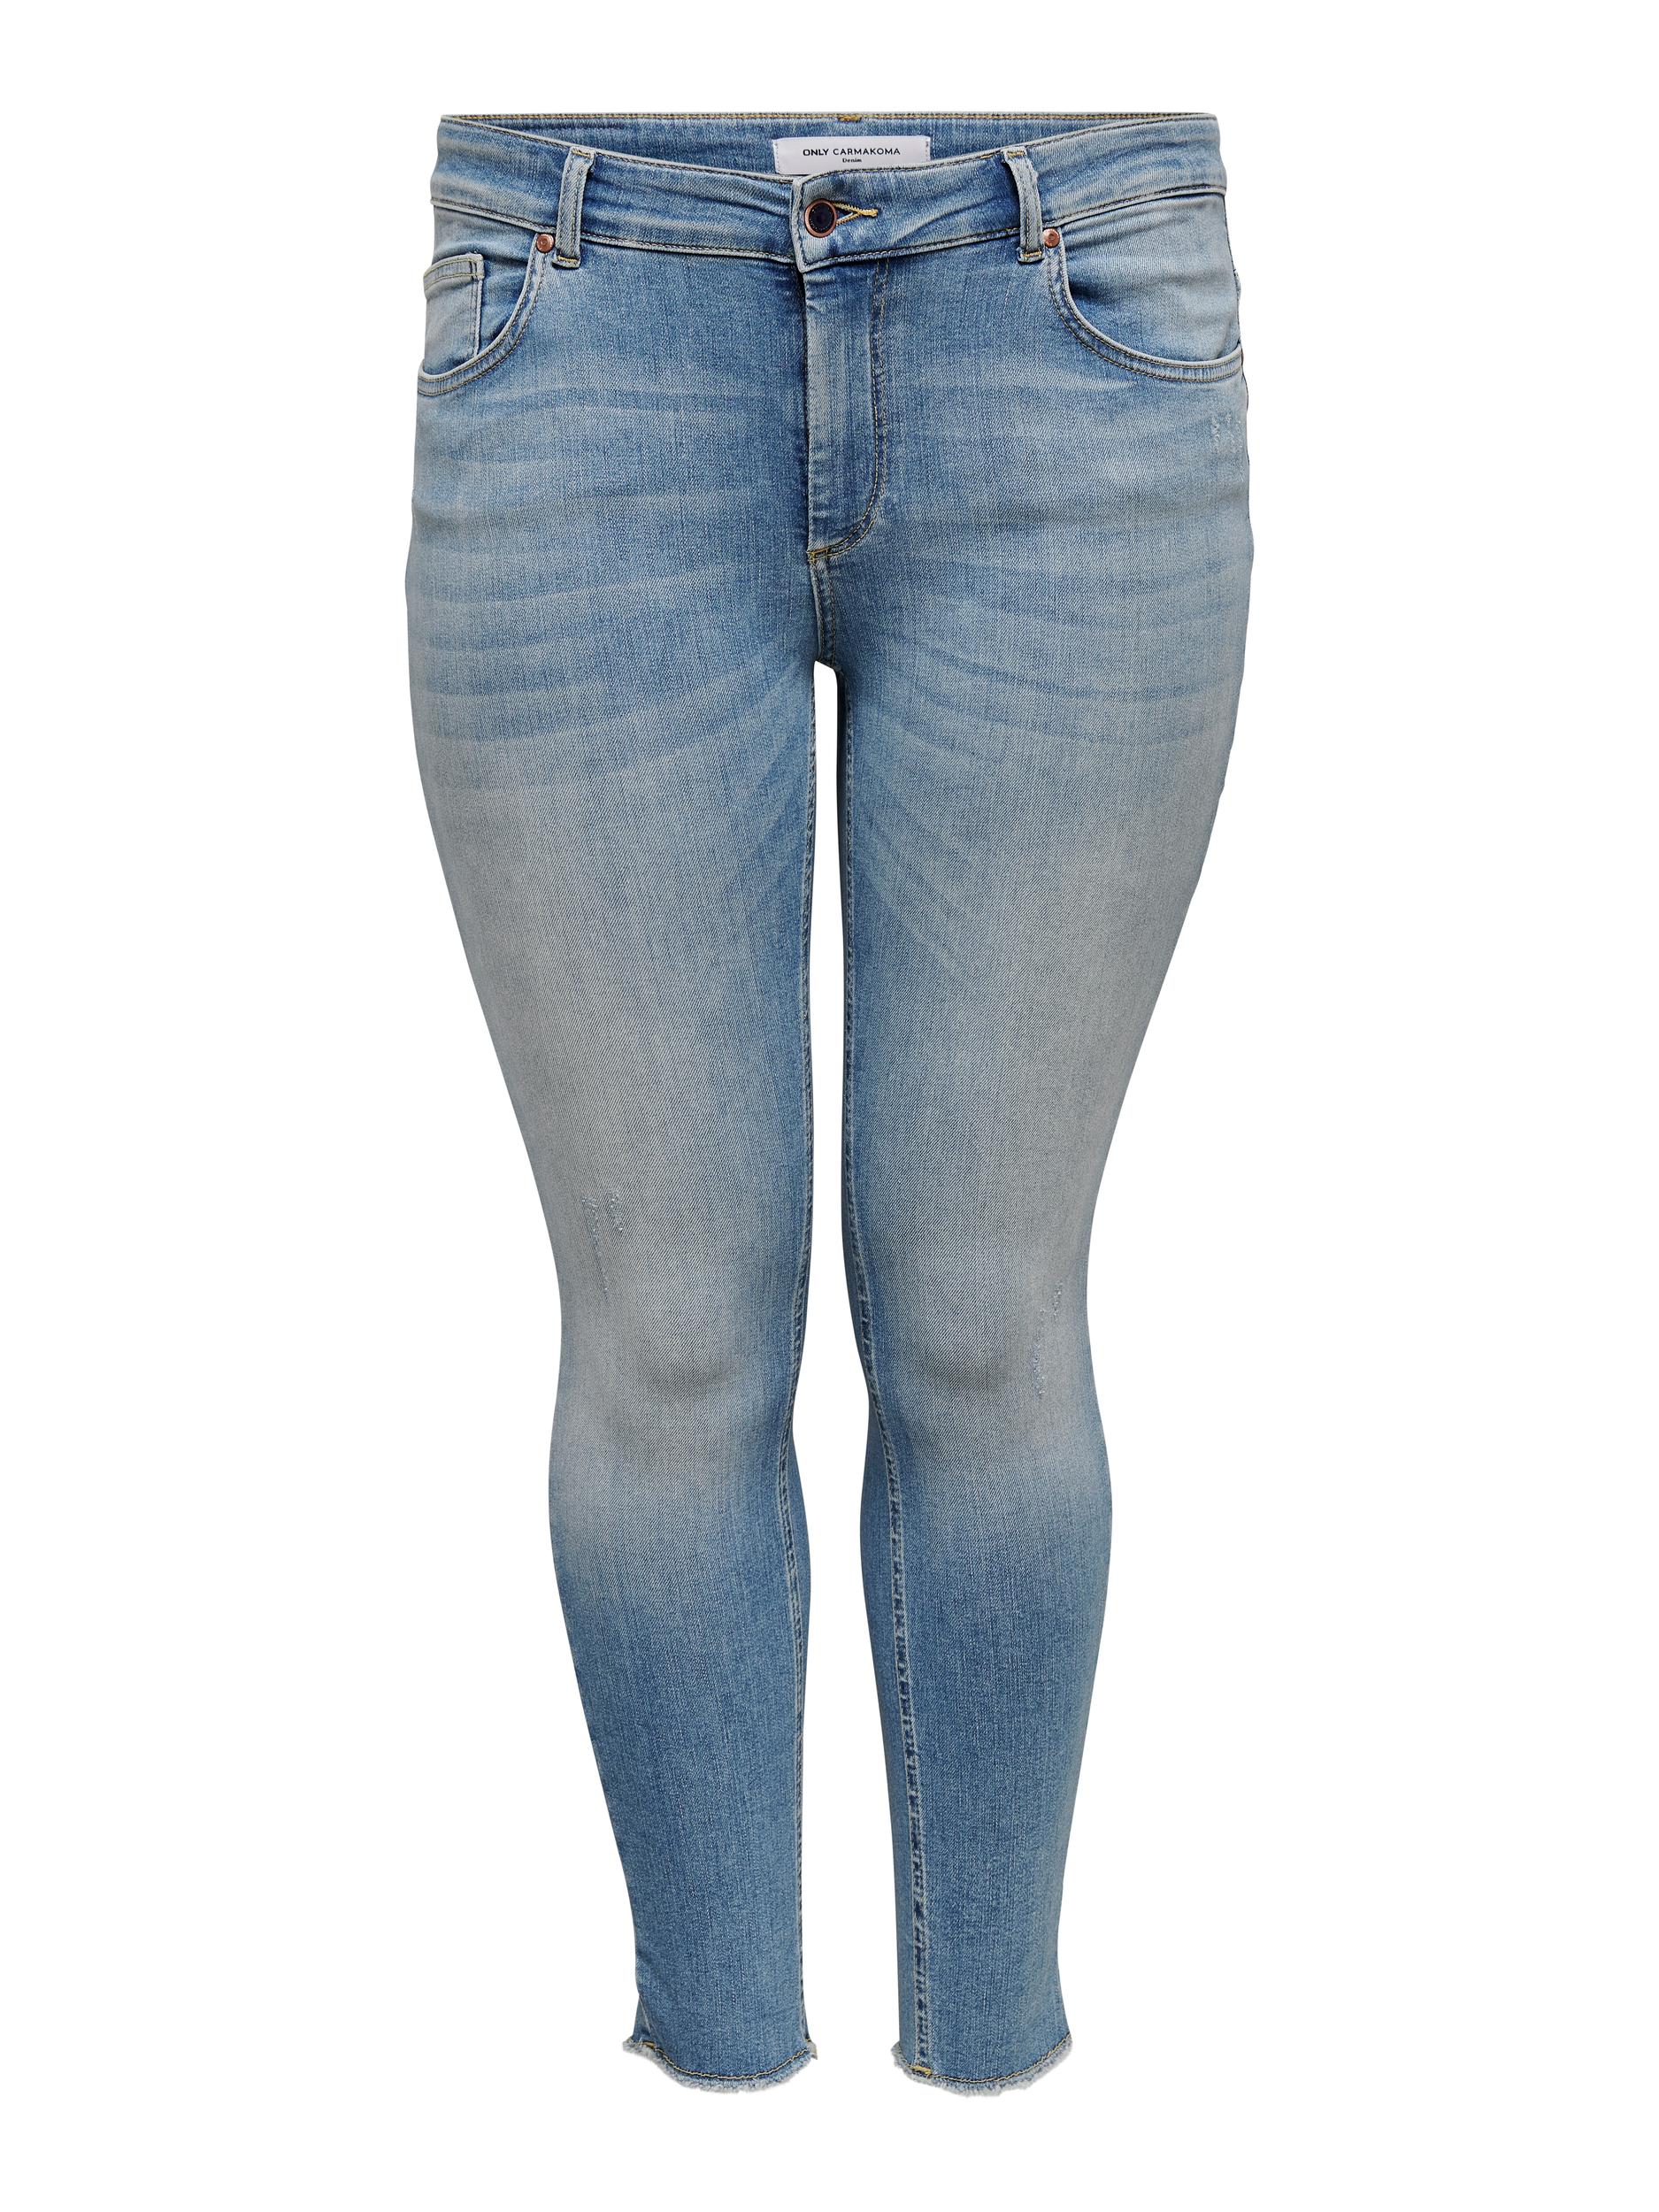 XkzUp Donna ONLY Carmakoma Jeans Willy in Blu Chiaro 